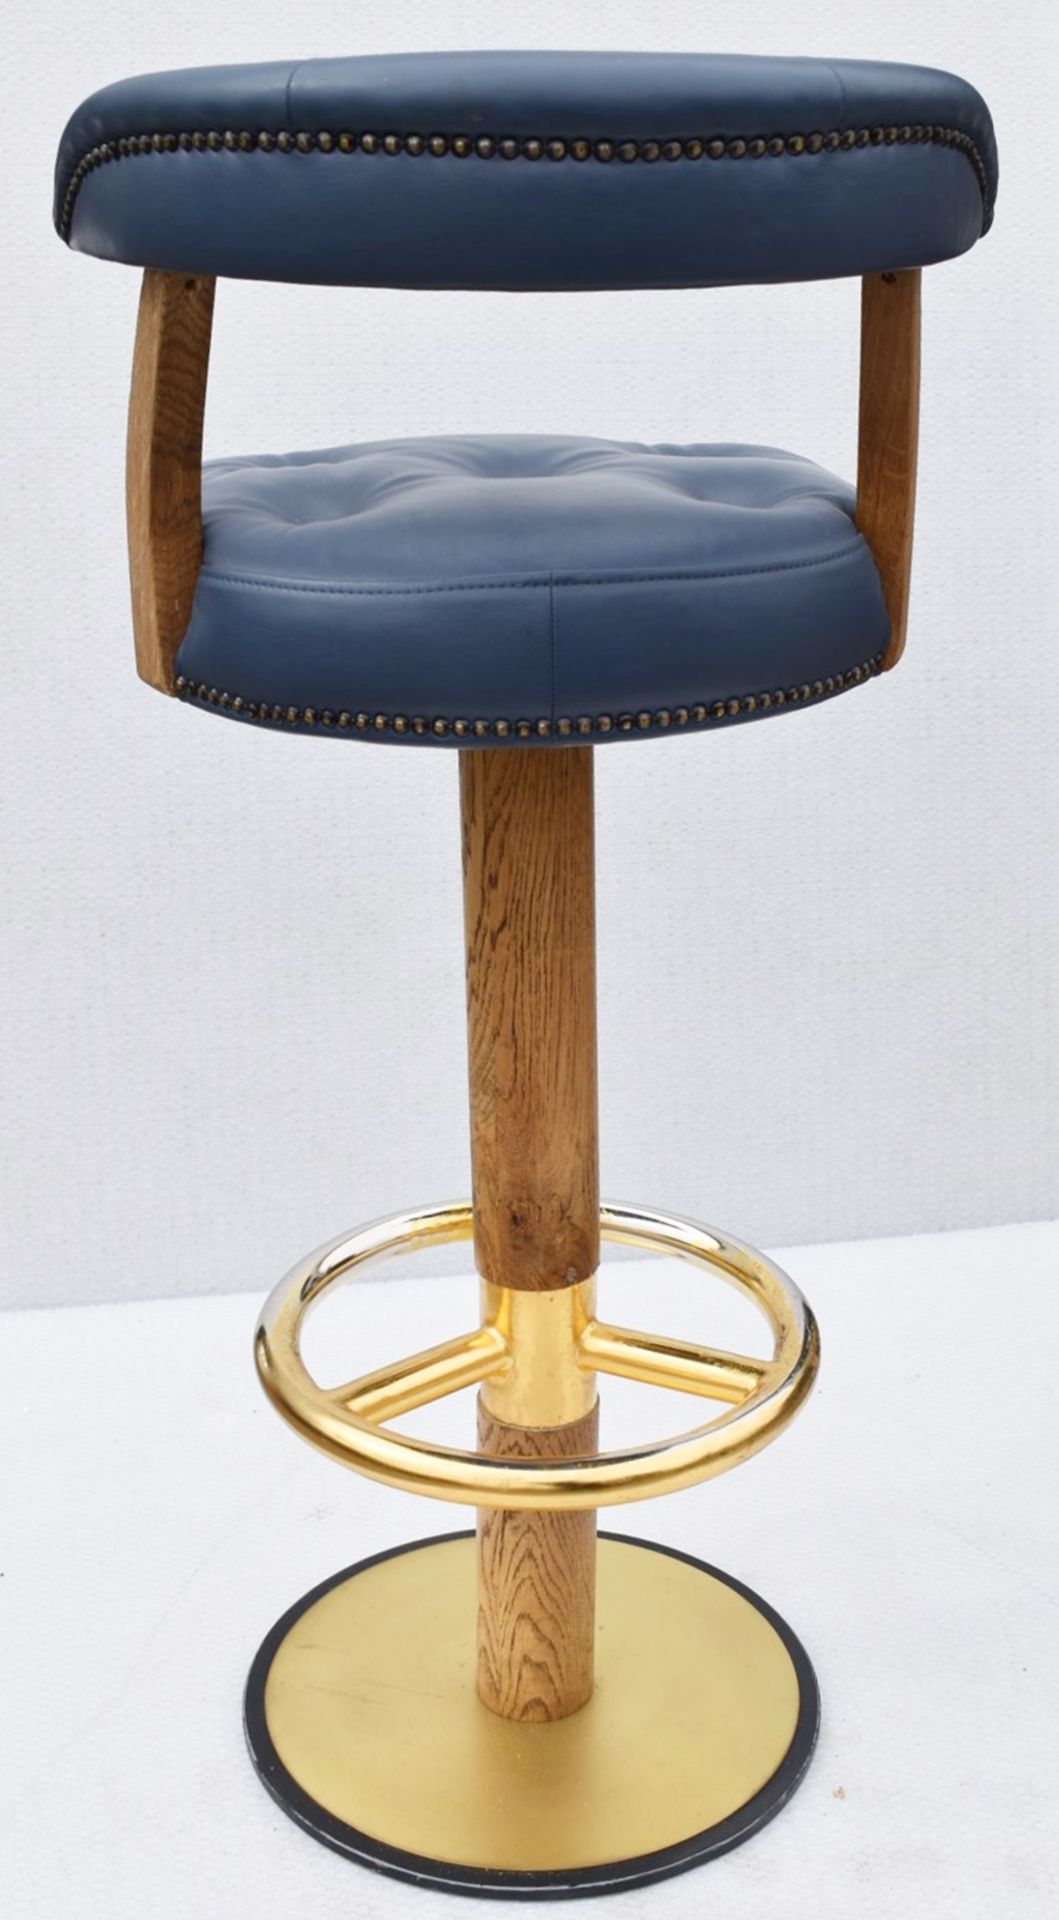 1 x Luxury Buttoned Bar Stool with Wooden Frame, Metal Base, Footrest and Studded Upholstery in a - Image 3 of 8